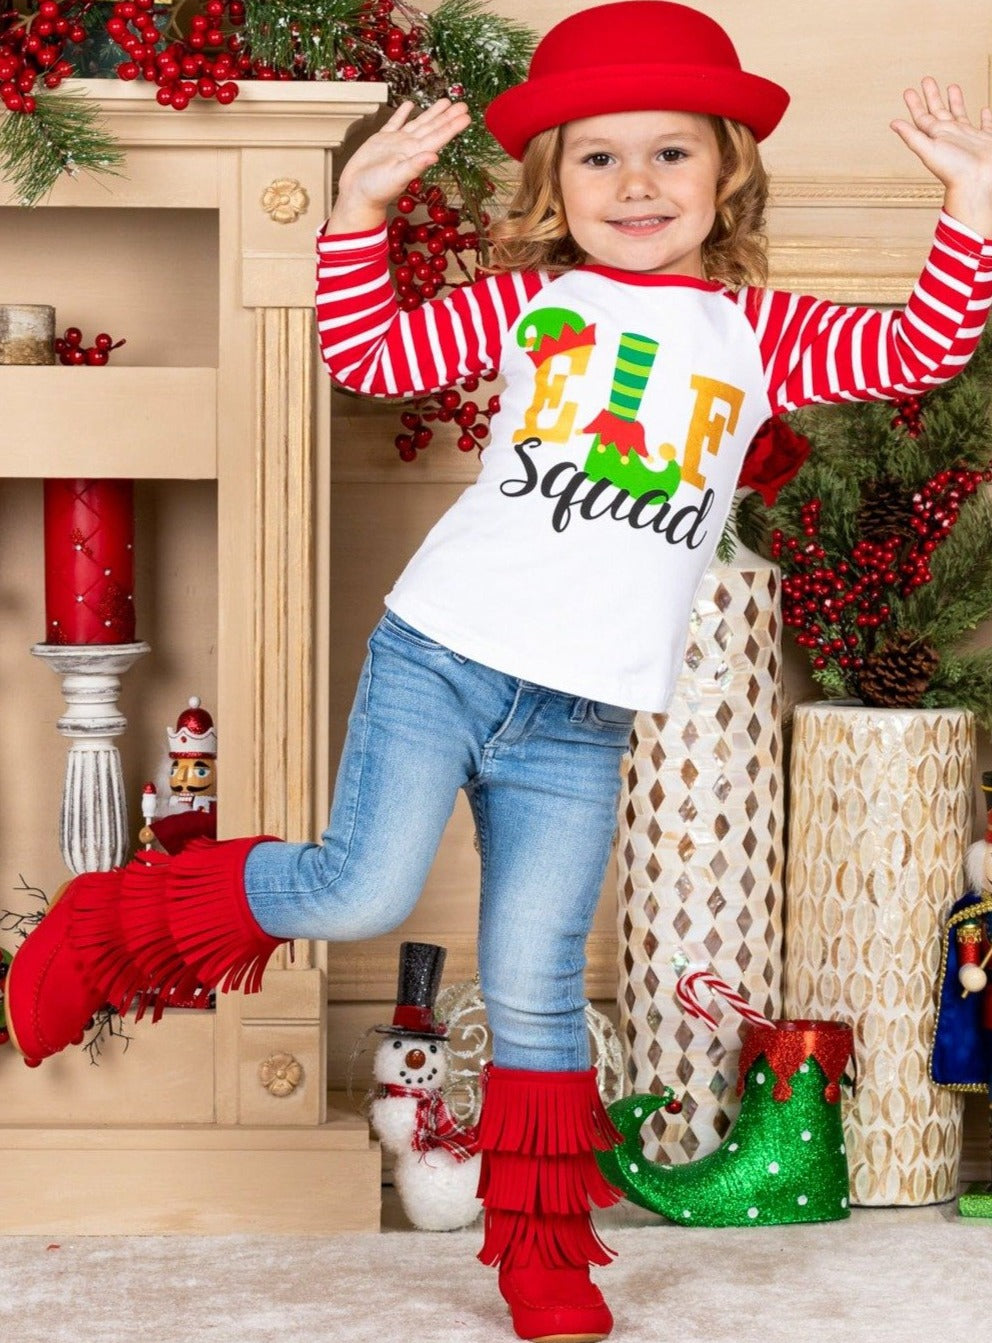 Girls Elf Squad top with striped ruffled longe sleeves